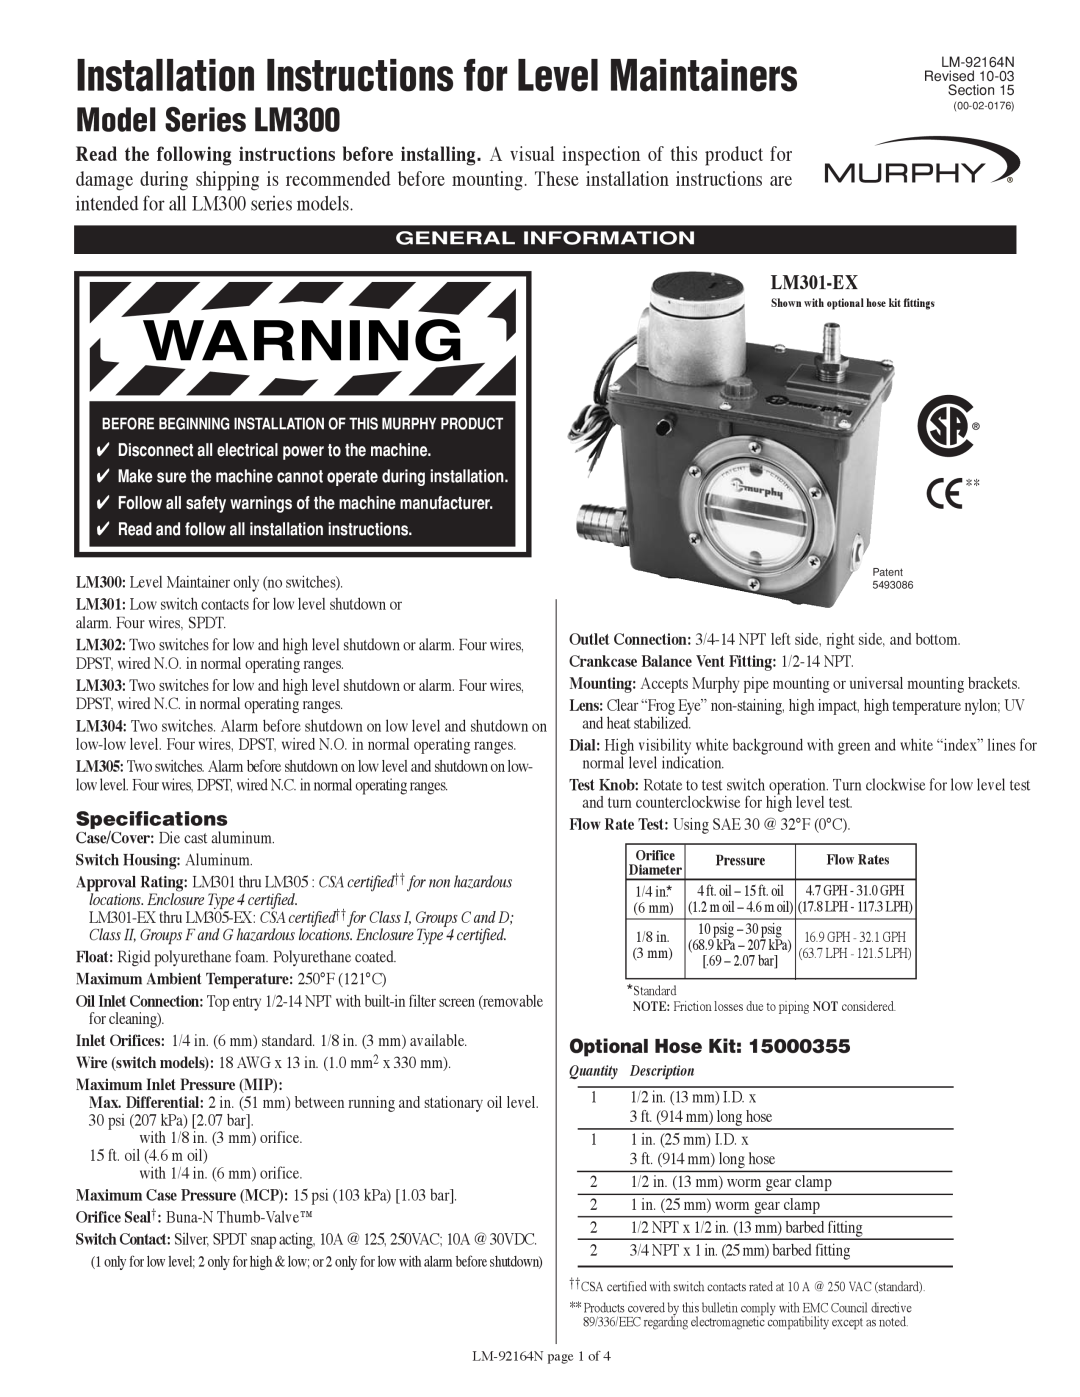 Murphy Series LM300 installation instructions LM301-EX, Specifications, Optional Hose Kit, General Information 